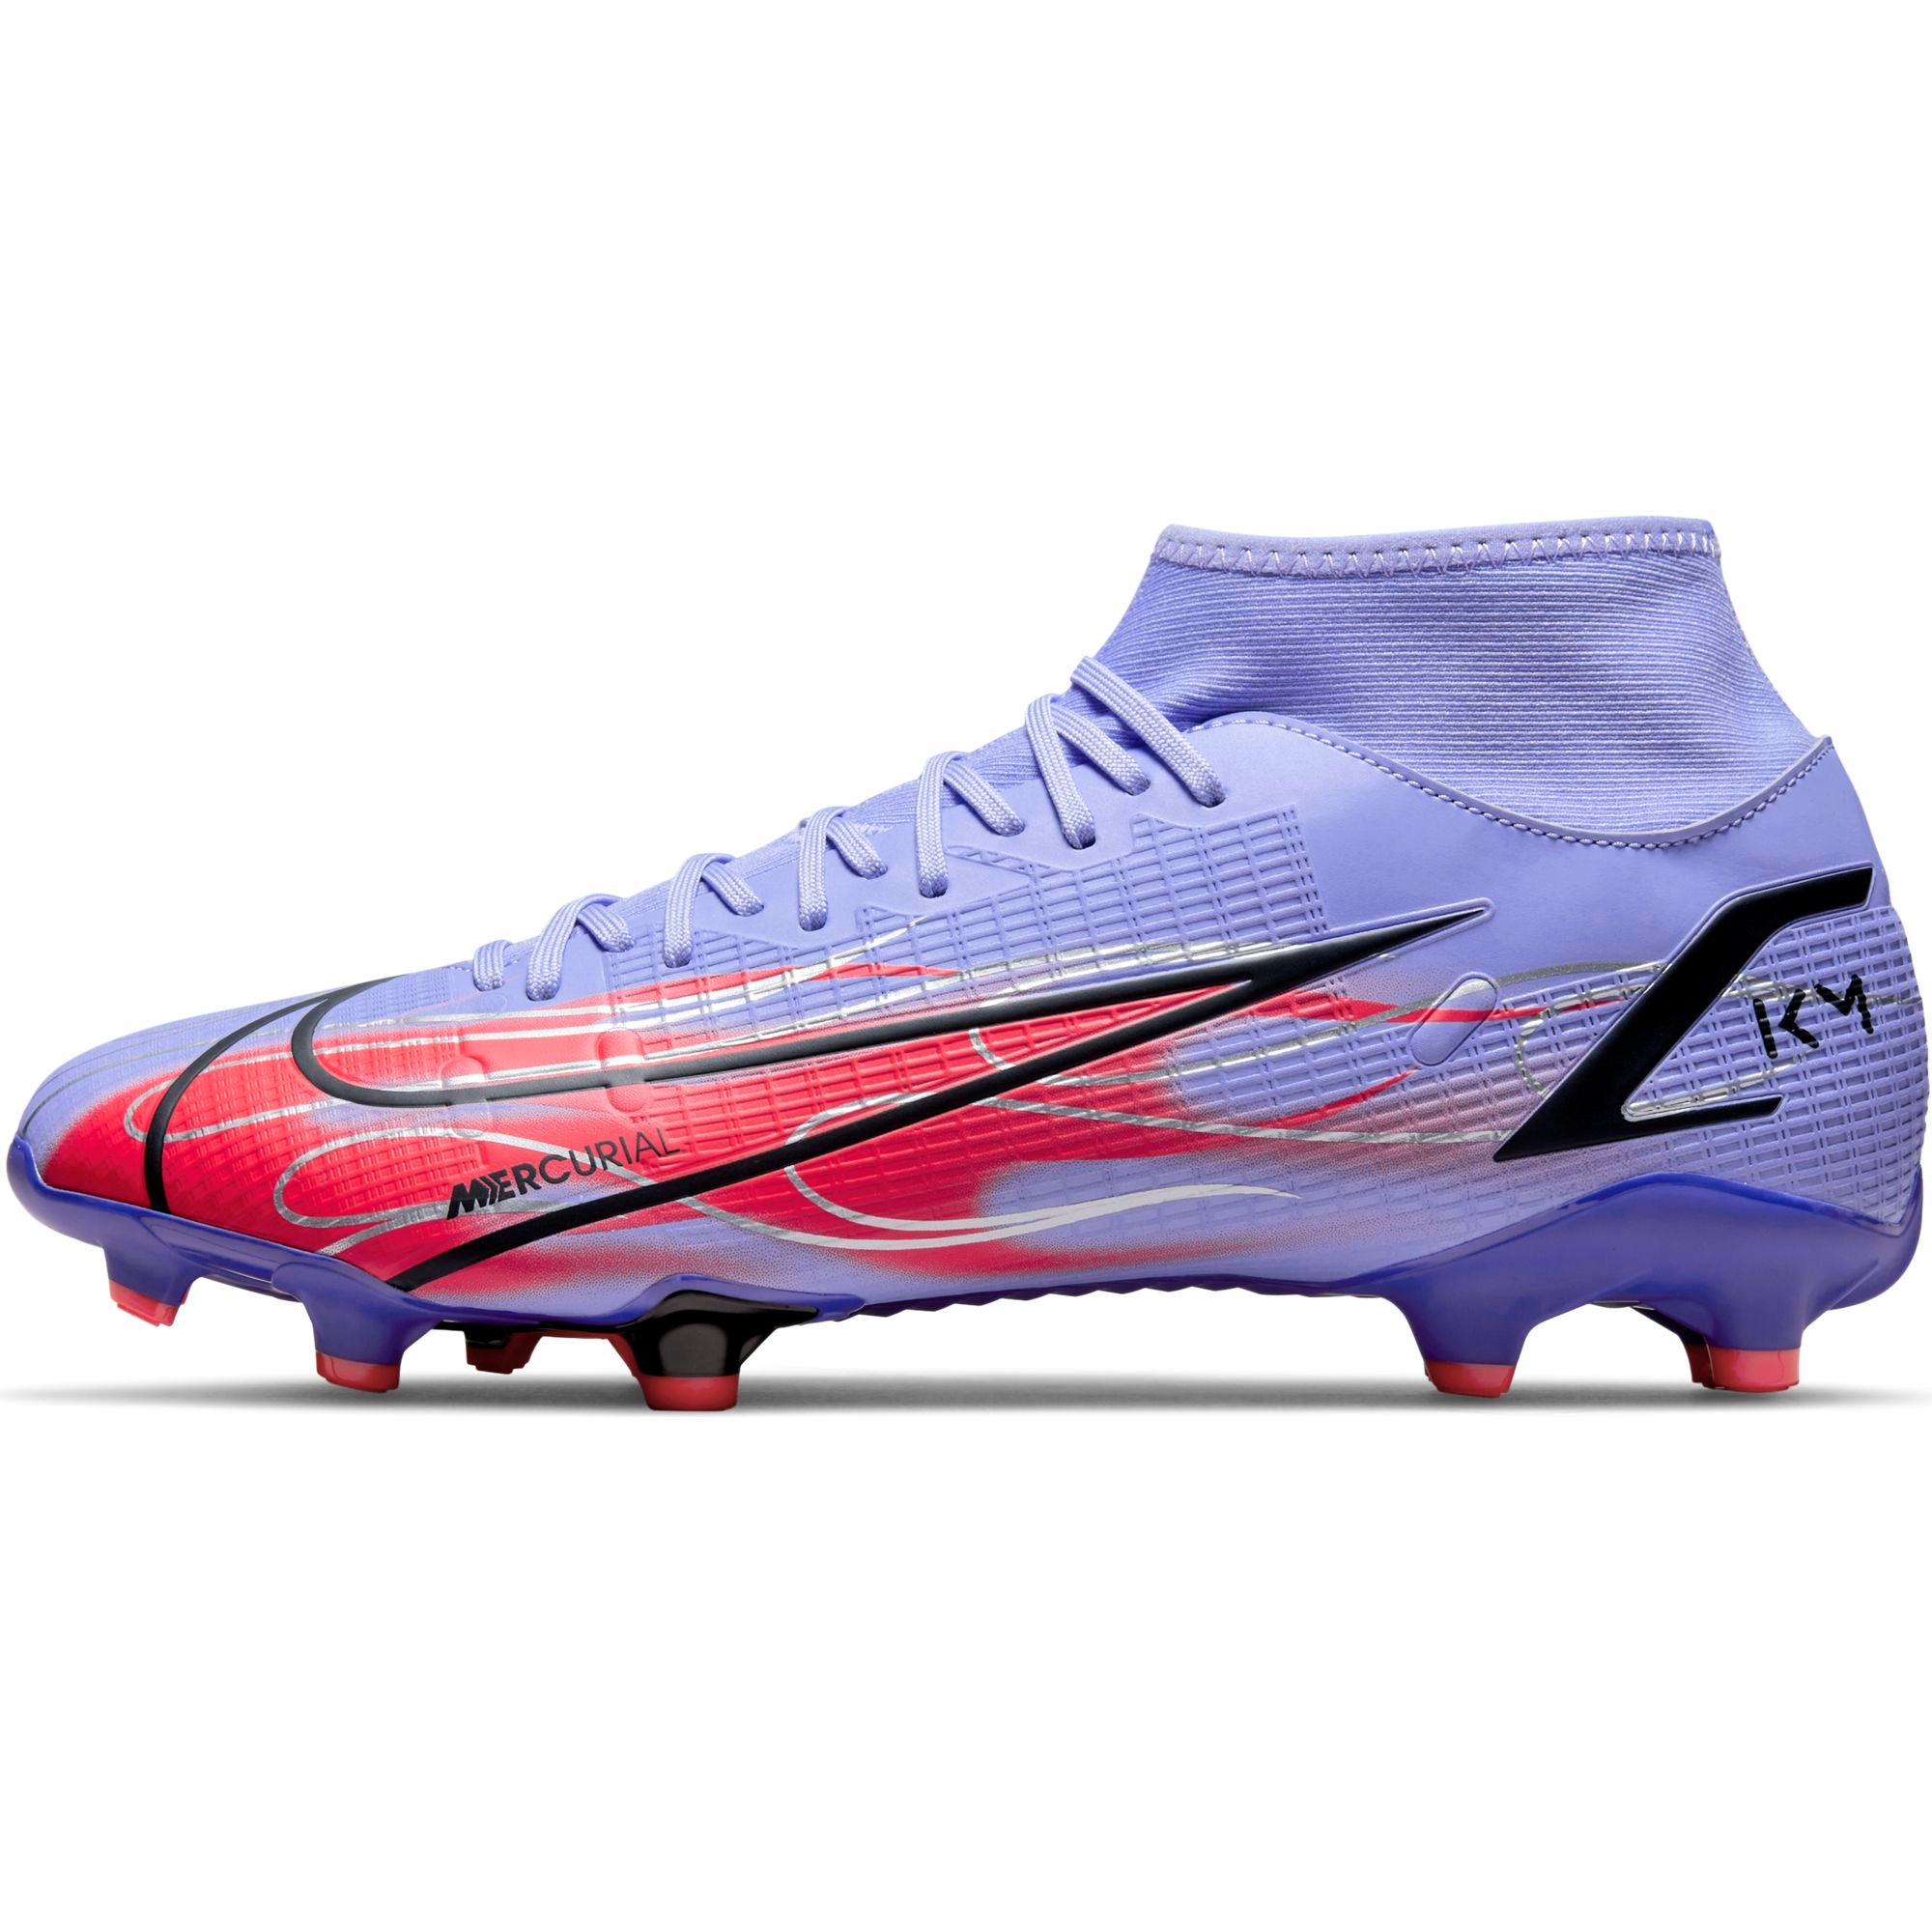 omverwerping graven Rendezvous Nike Mercurial Superfly 8 Academy KM MG >Multi-Ground Soccer Cleats